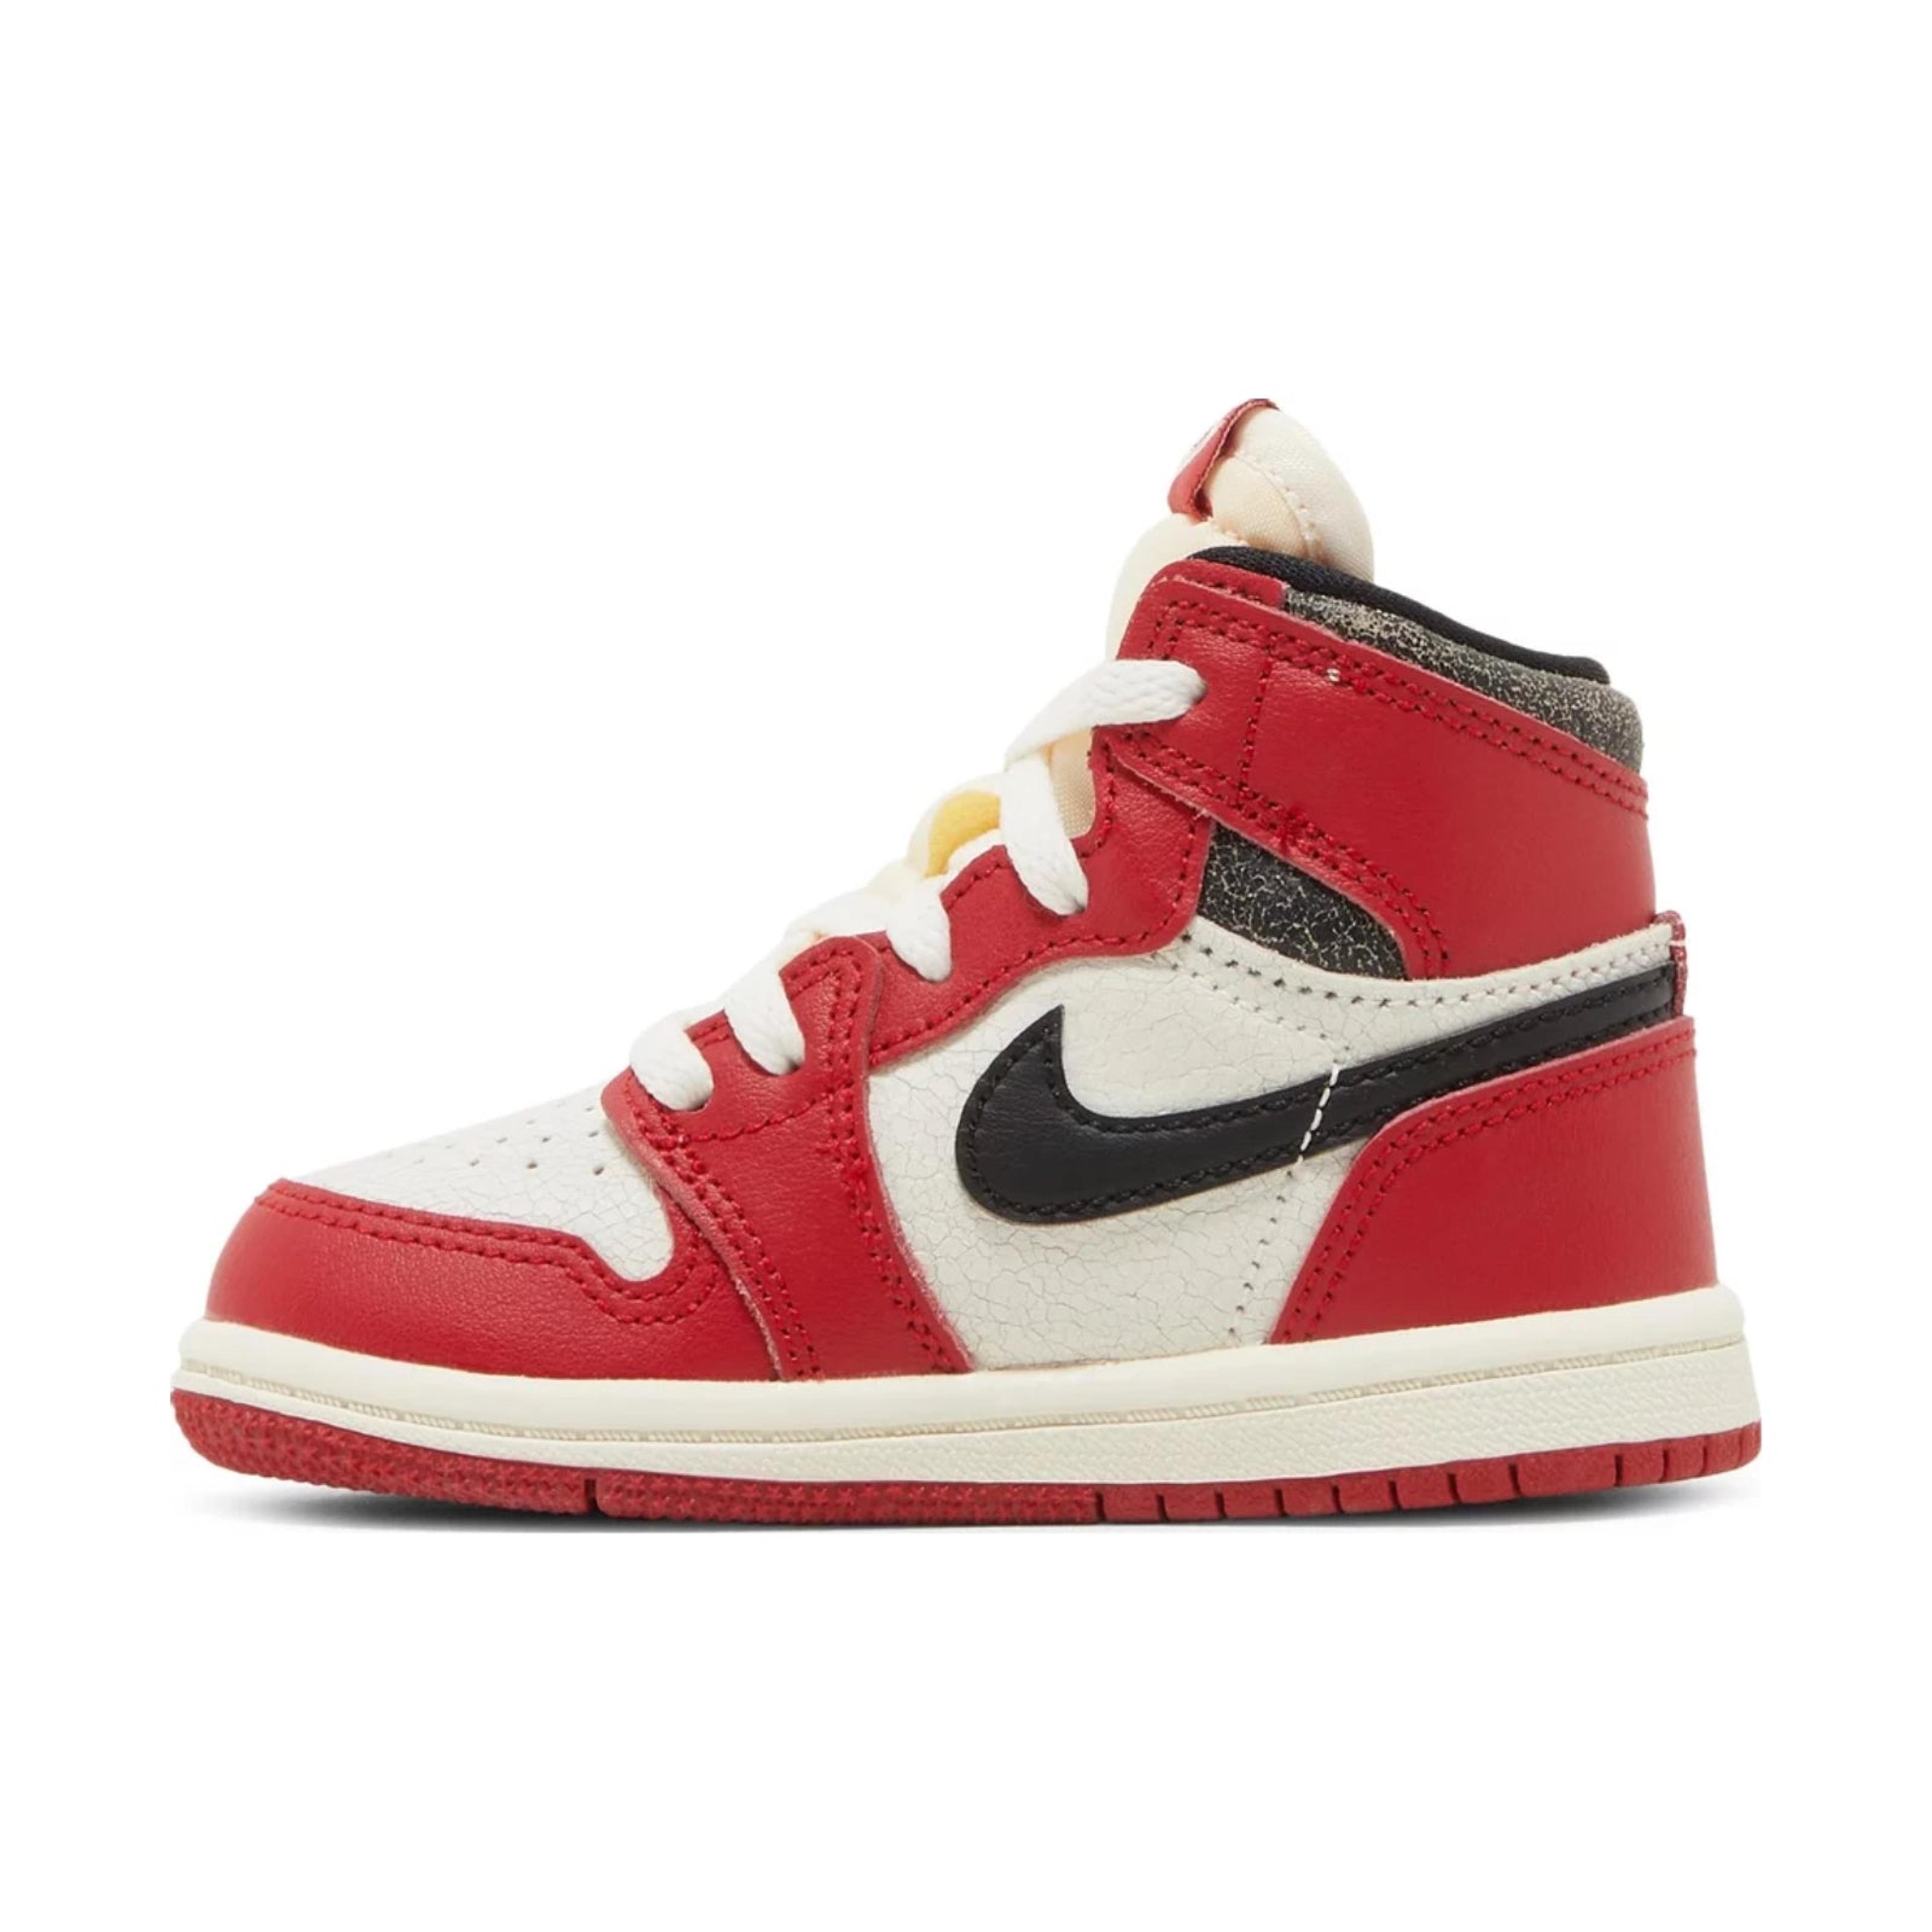 Alternate View 1 of Air Jordan 1 High (TD), Chicago Lost and Found